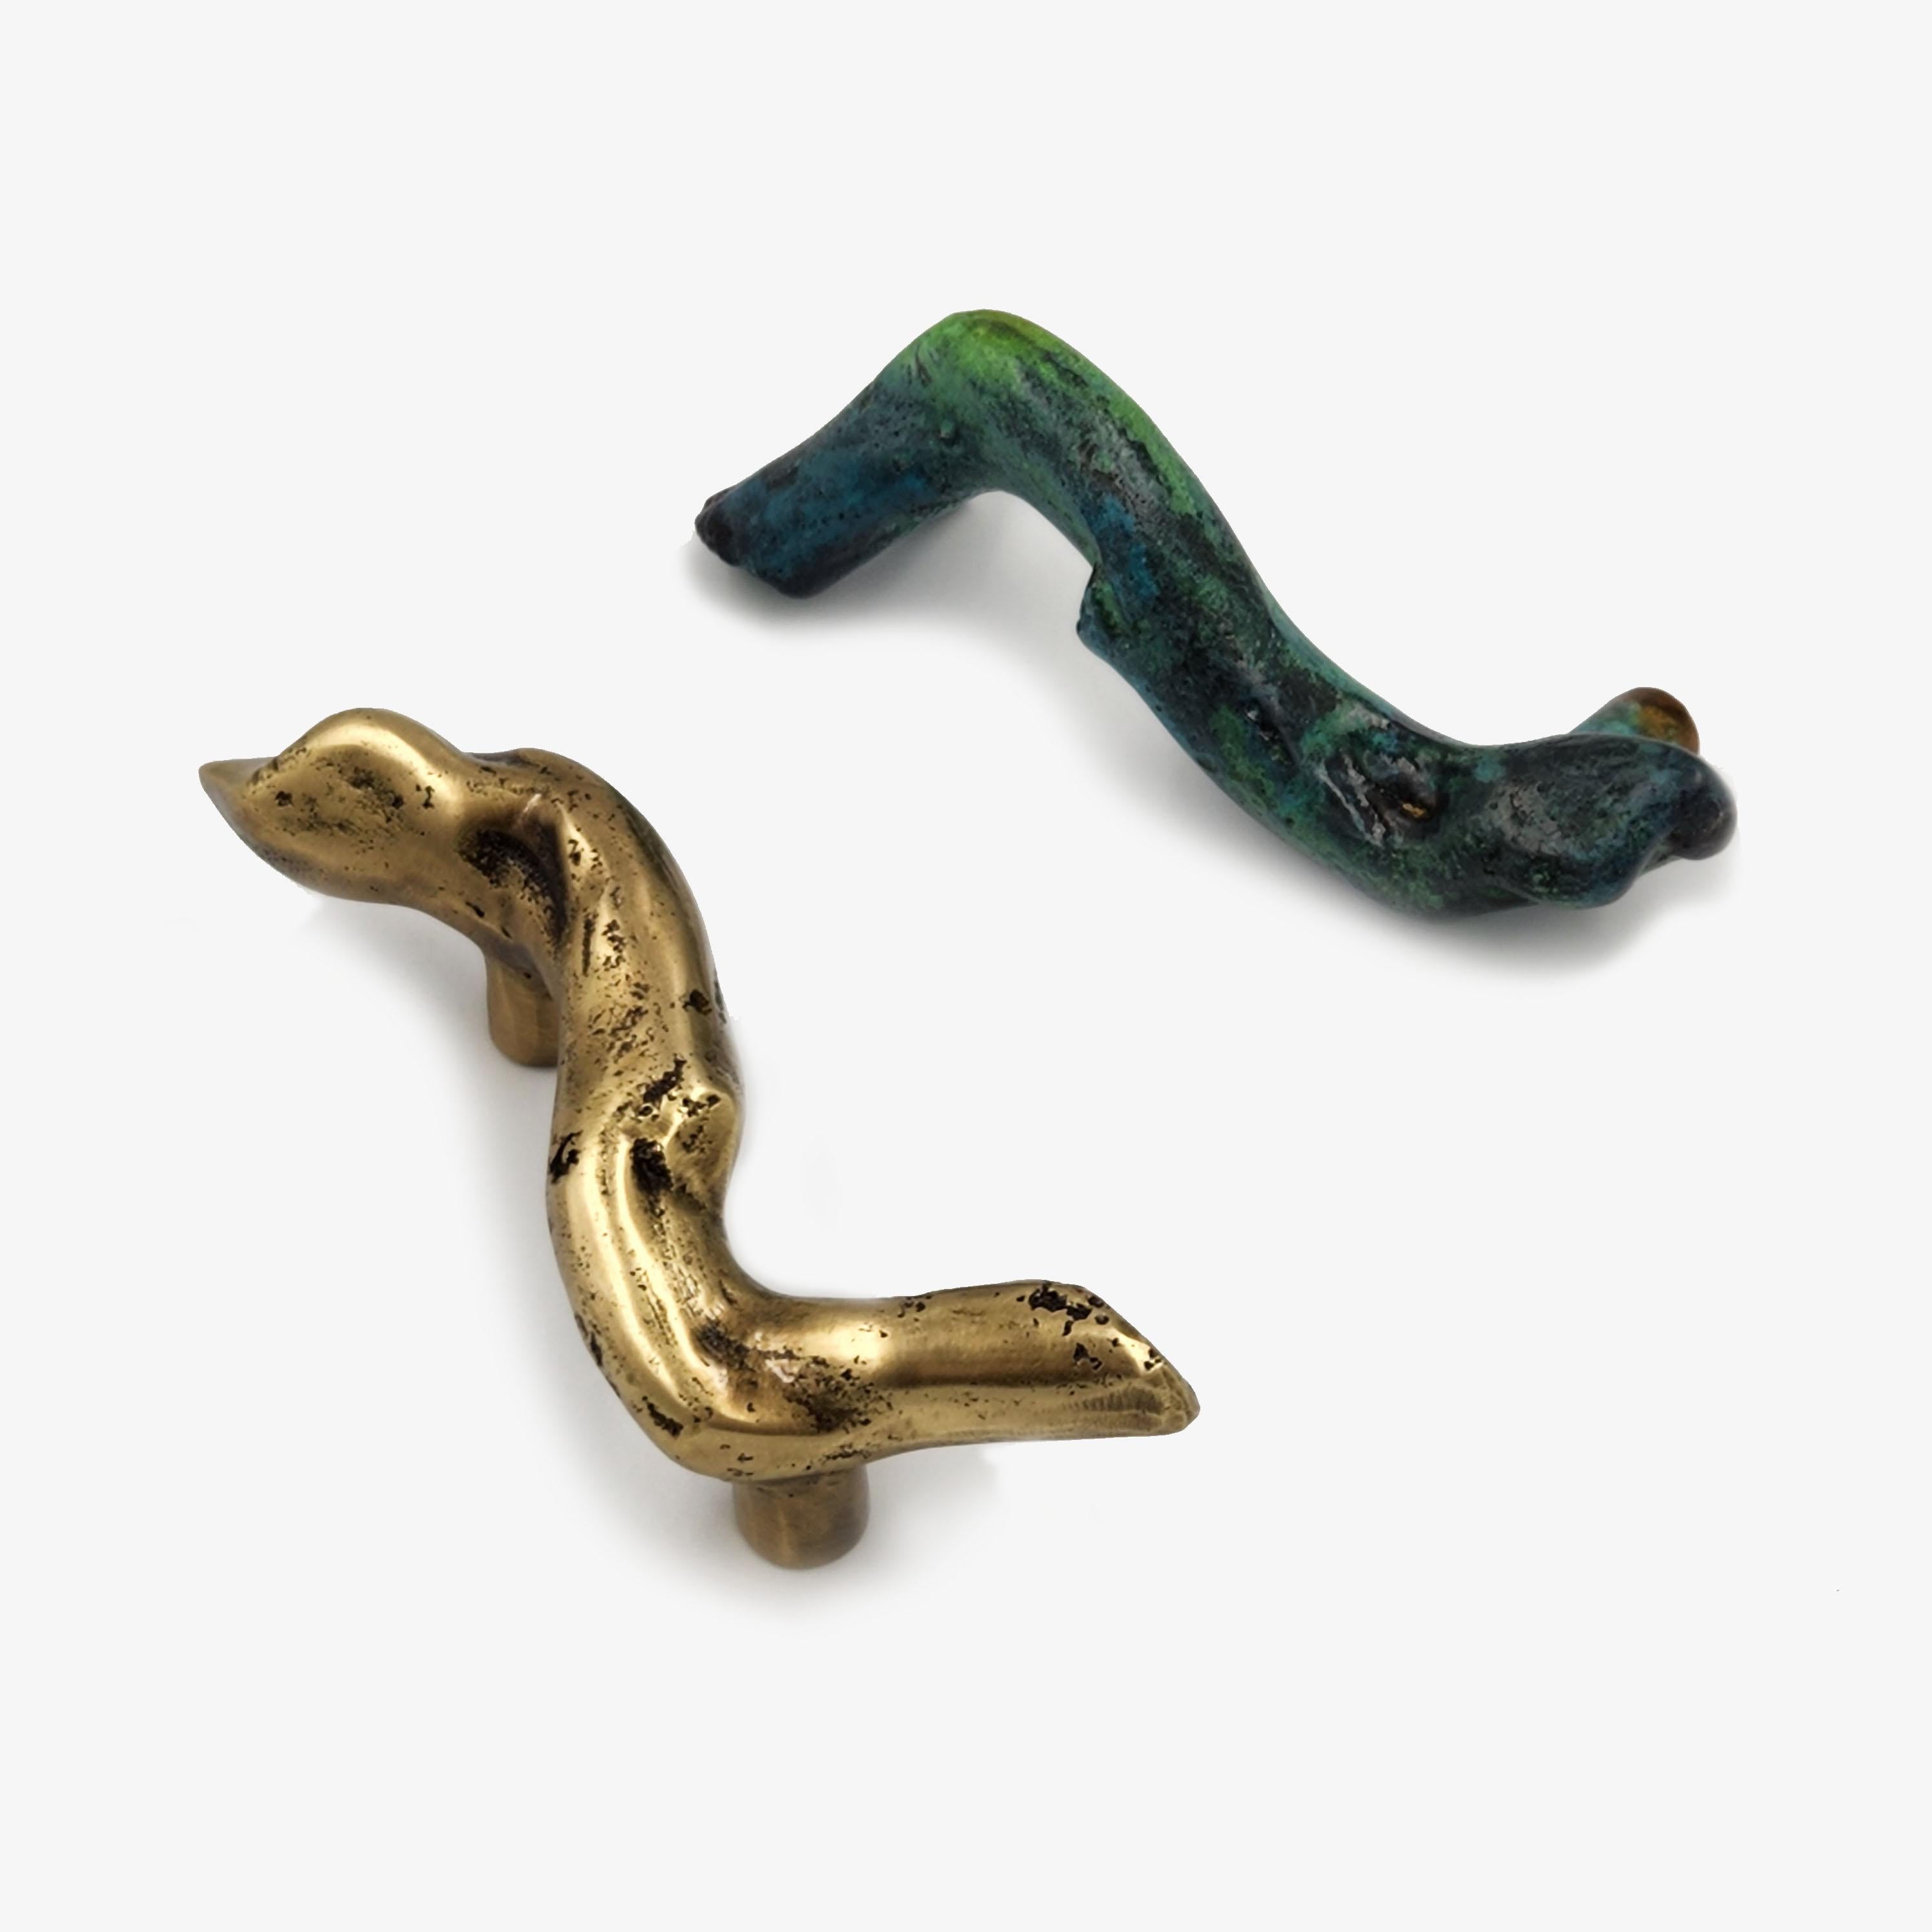 A tribute to nature, infinite source of patterns with mineral elements. Solid brass pull handle made in our workshops.
